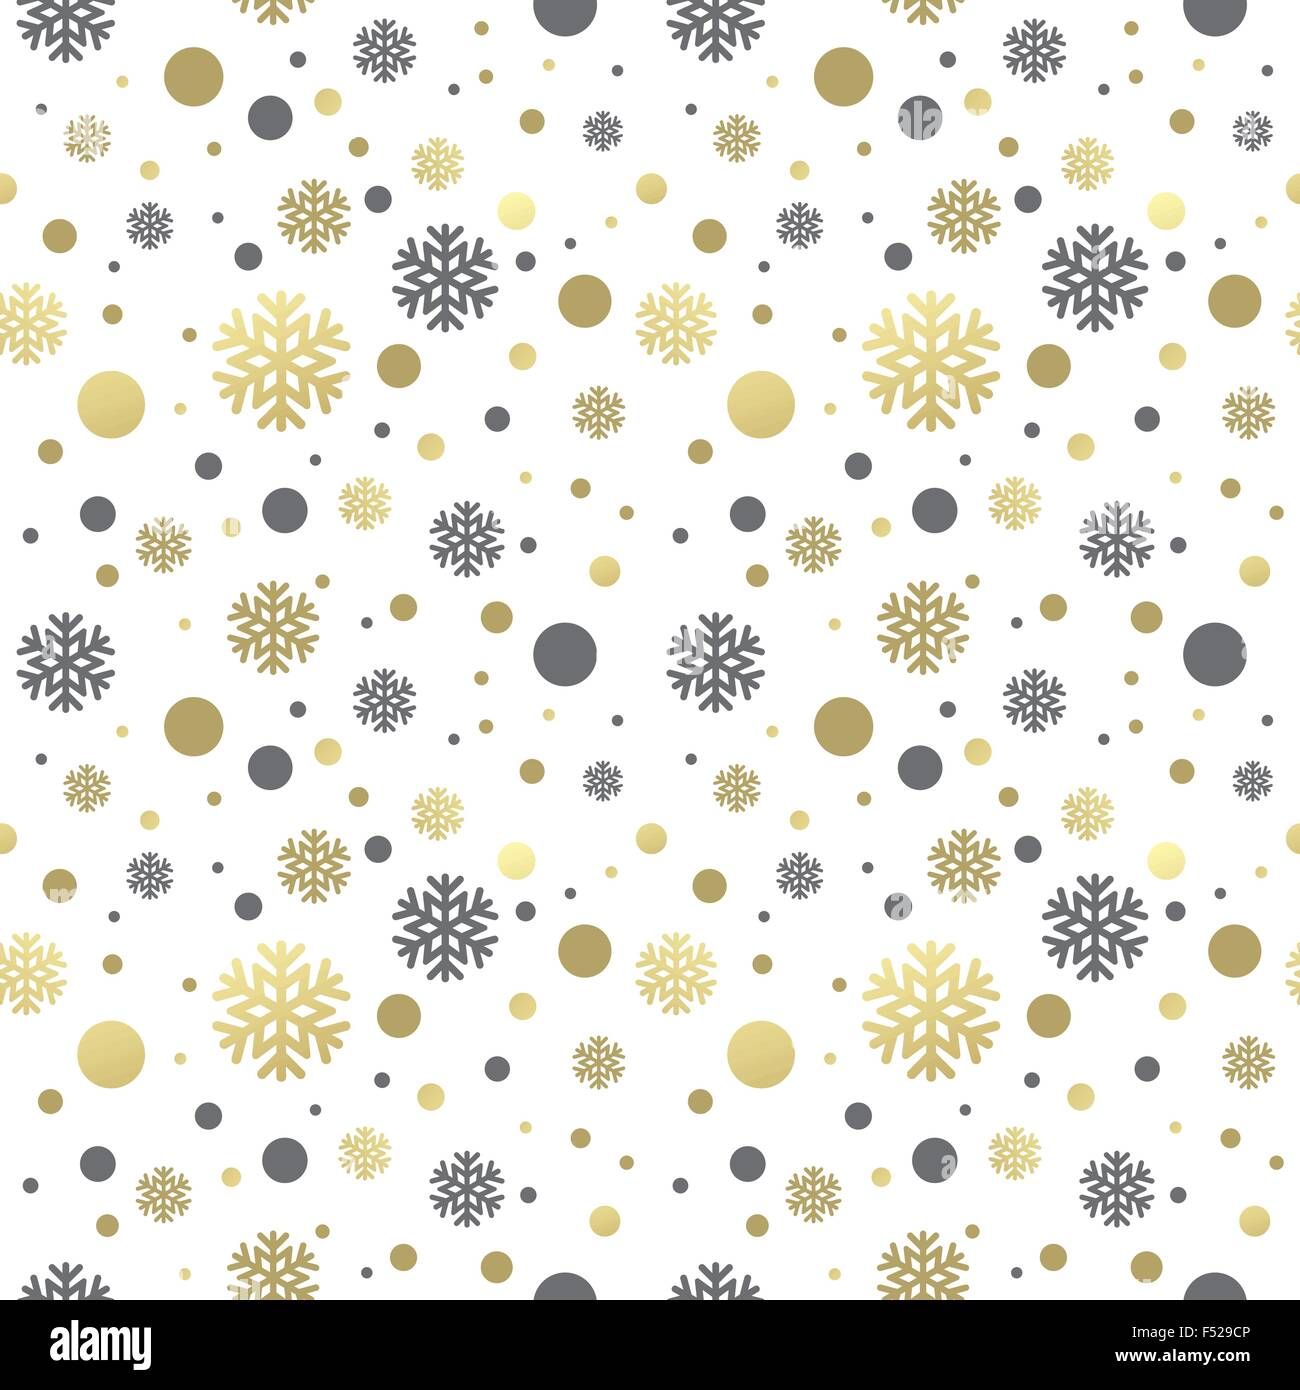 Free download Seamless white christmas wallpaper with black and golden ...